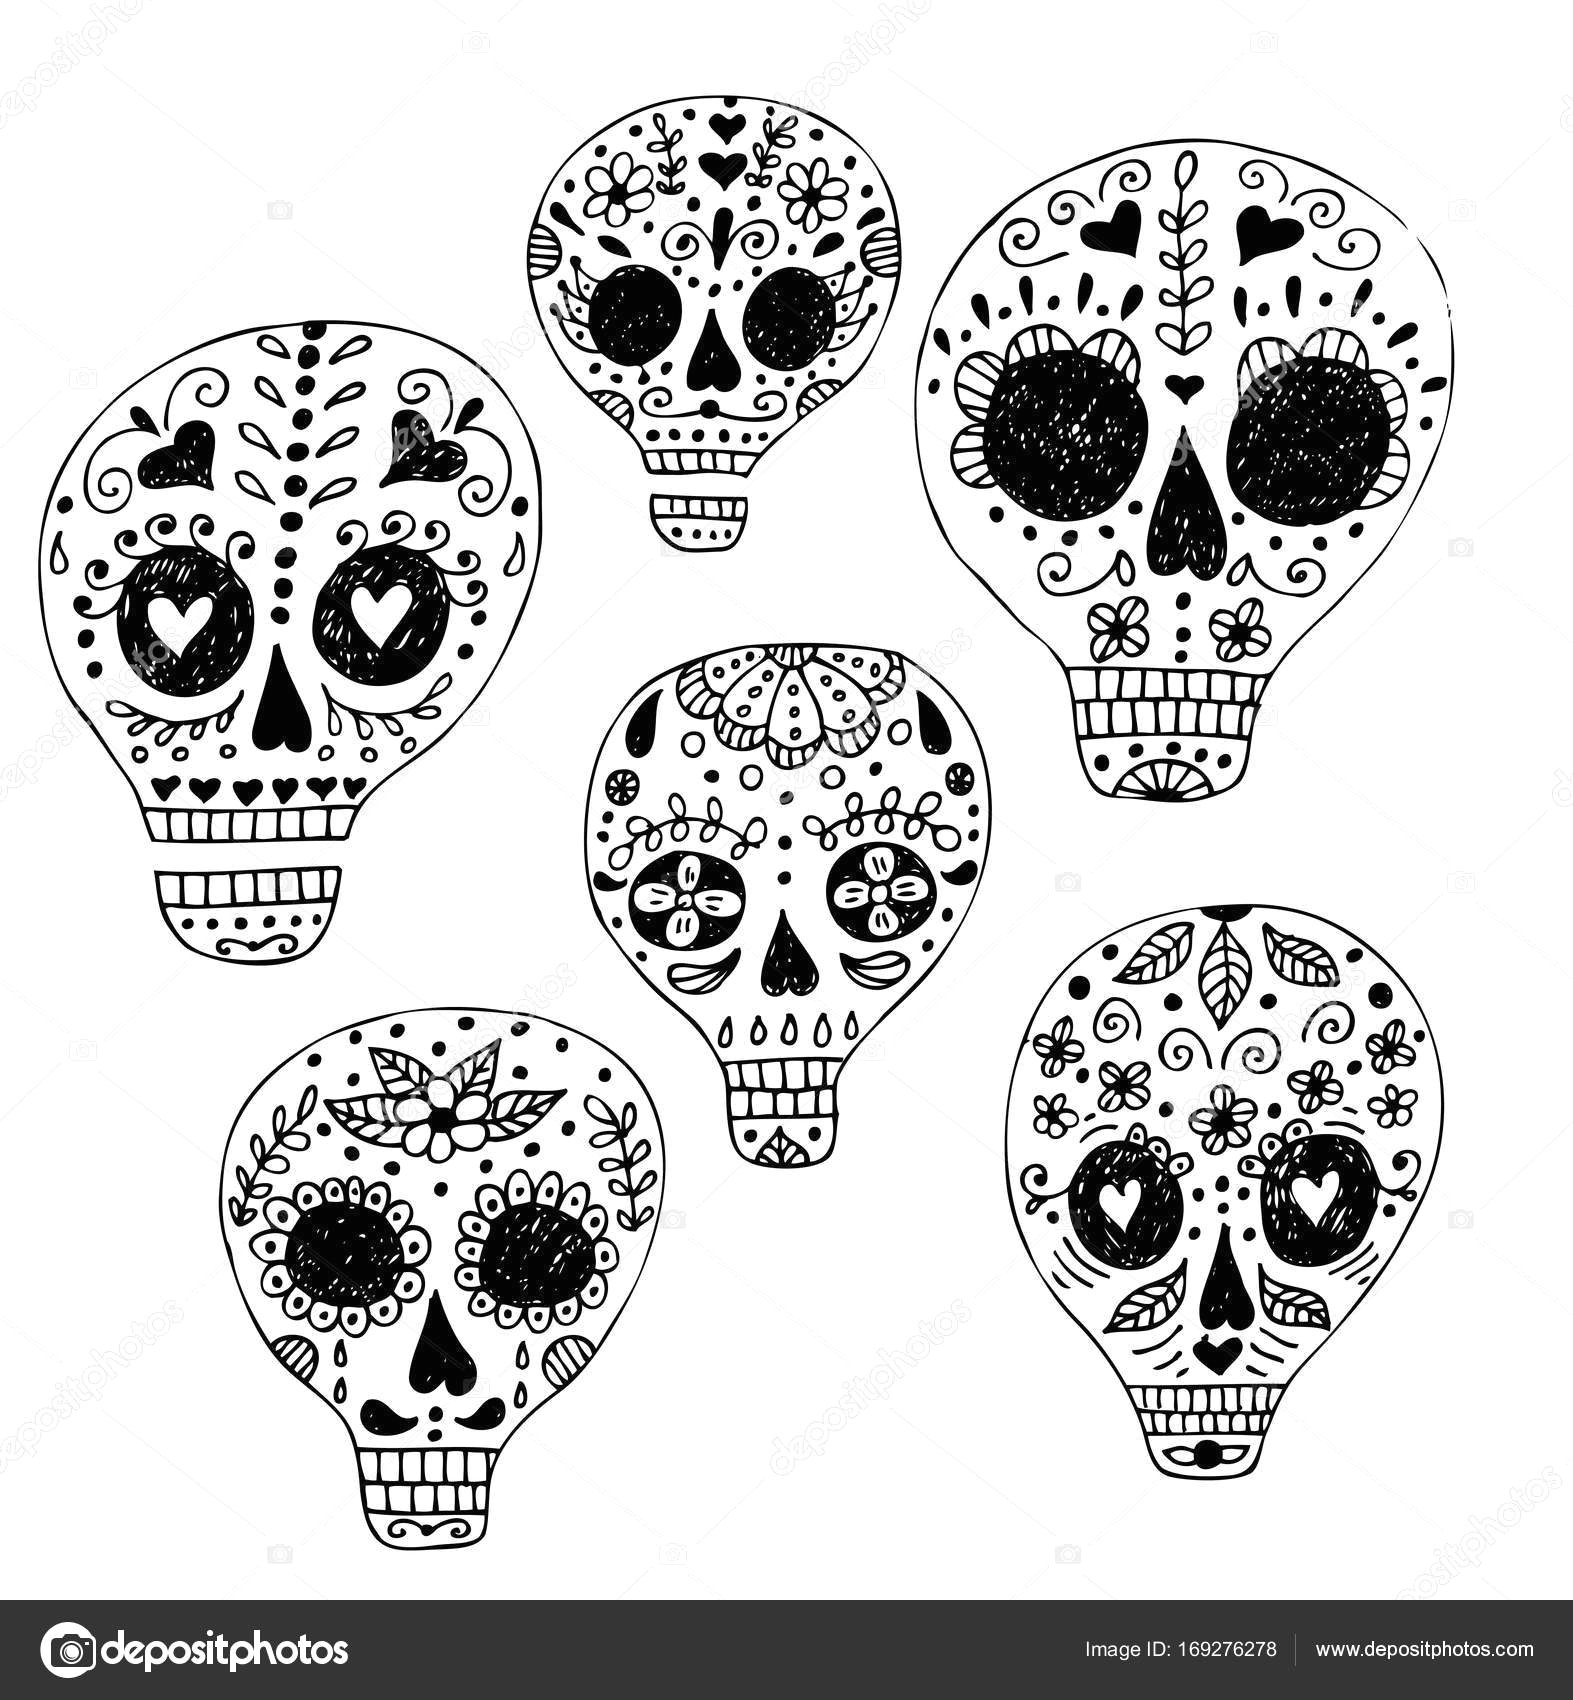 Skull Drawing Pattern Skull with Floral ornament Stock Vector A C Vip2807 169276278